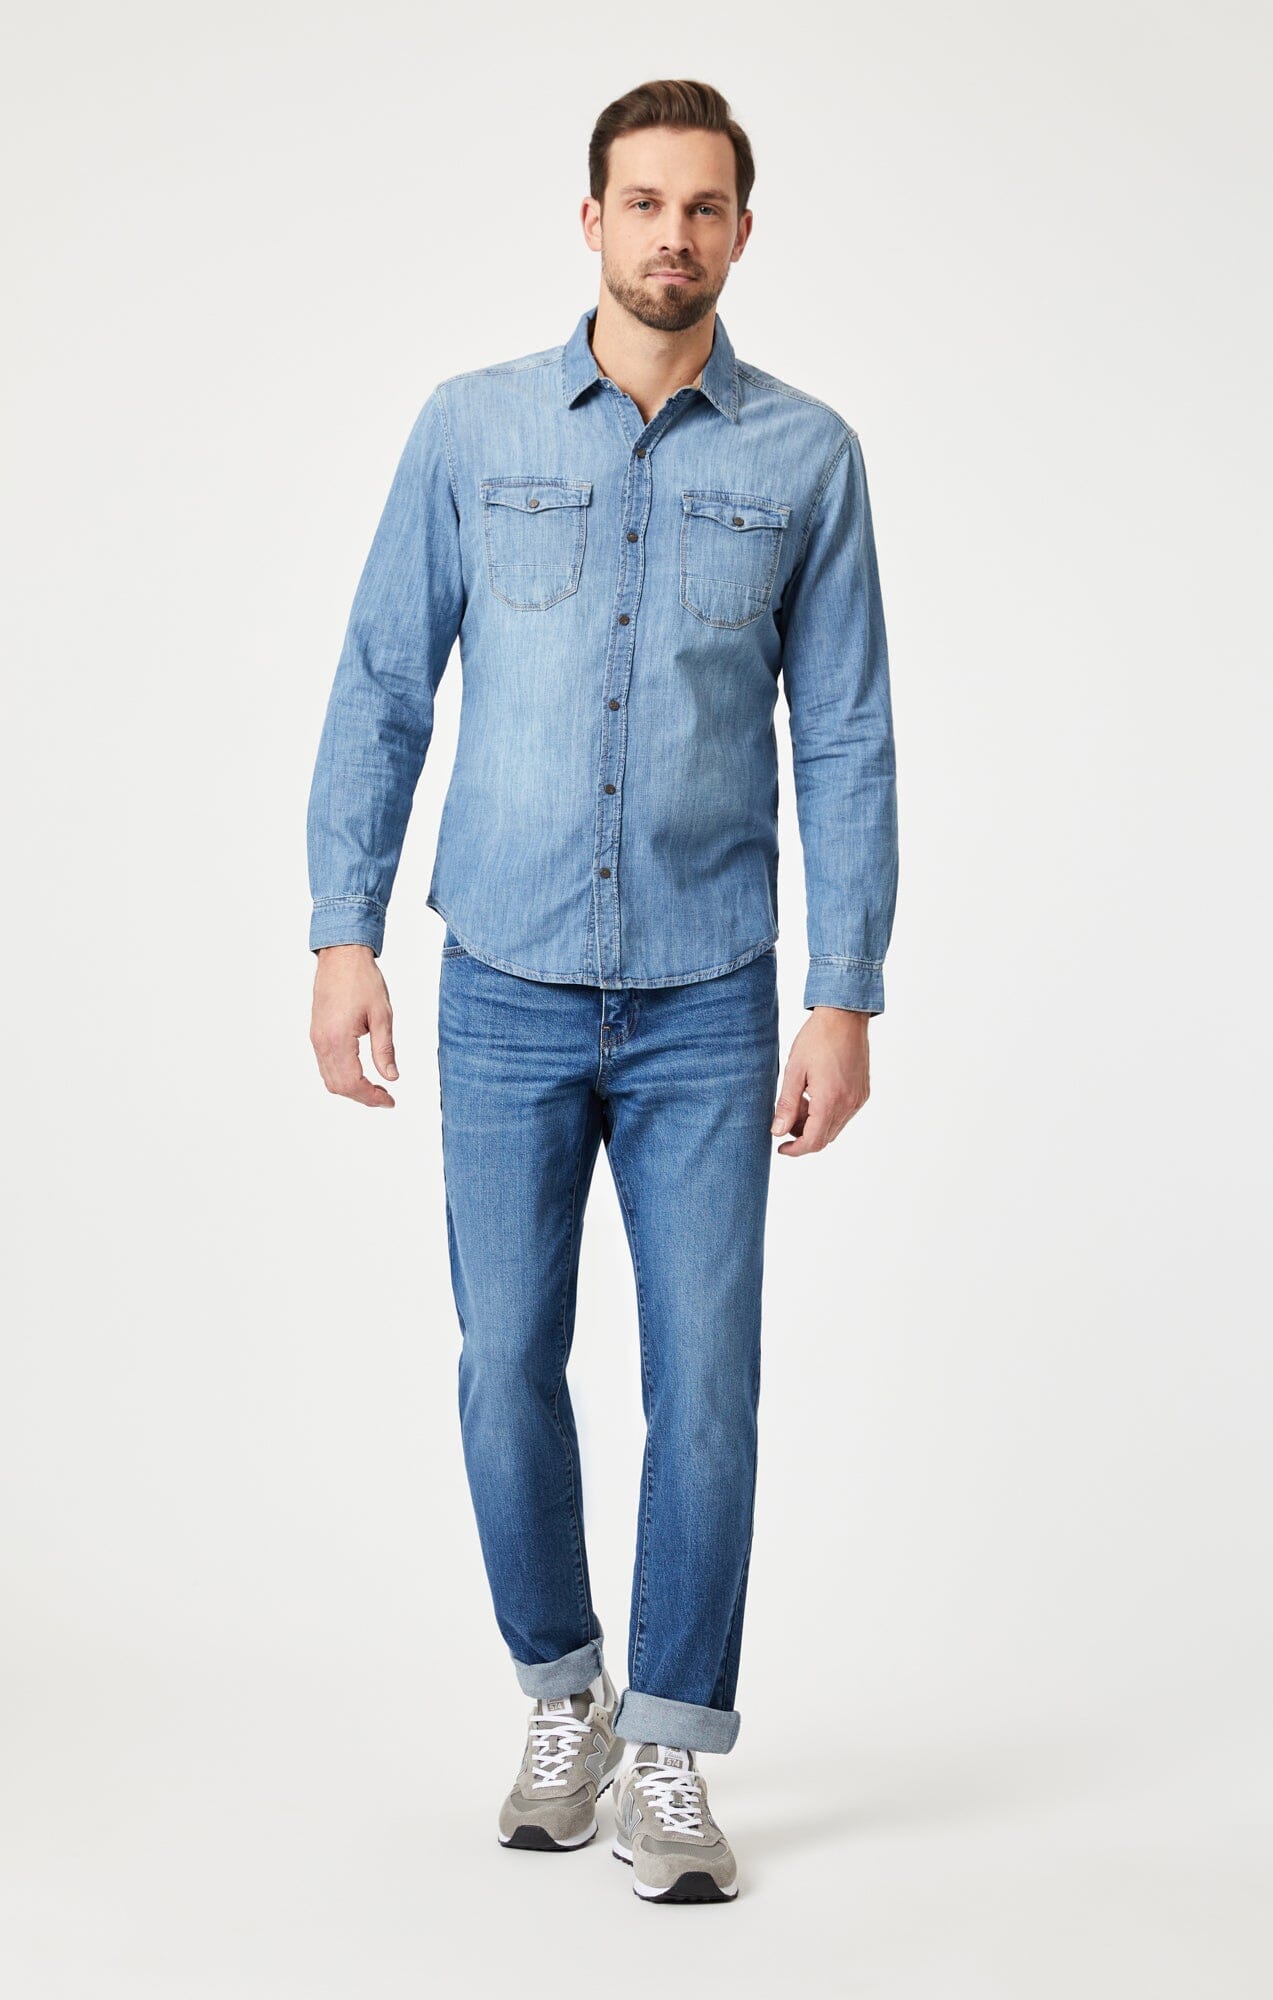 Light Blue Jeans Shirts - Buy Light Blue Jeans Shirts online in India